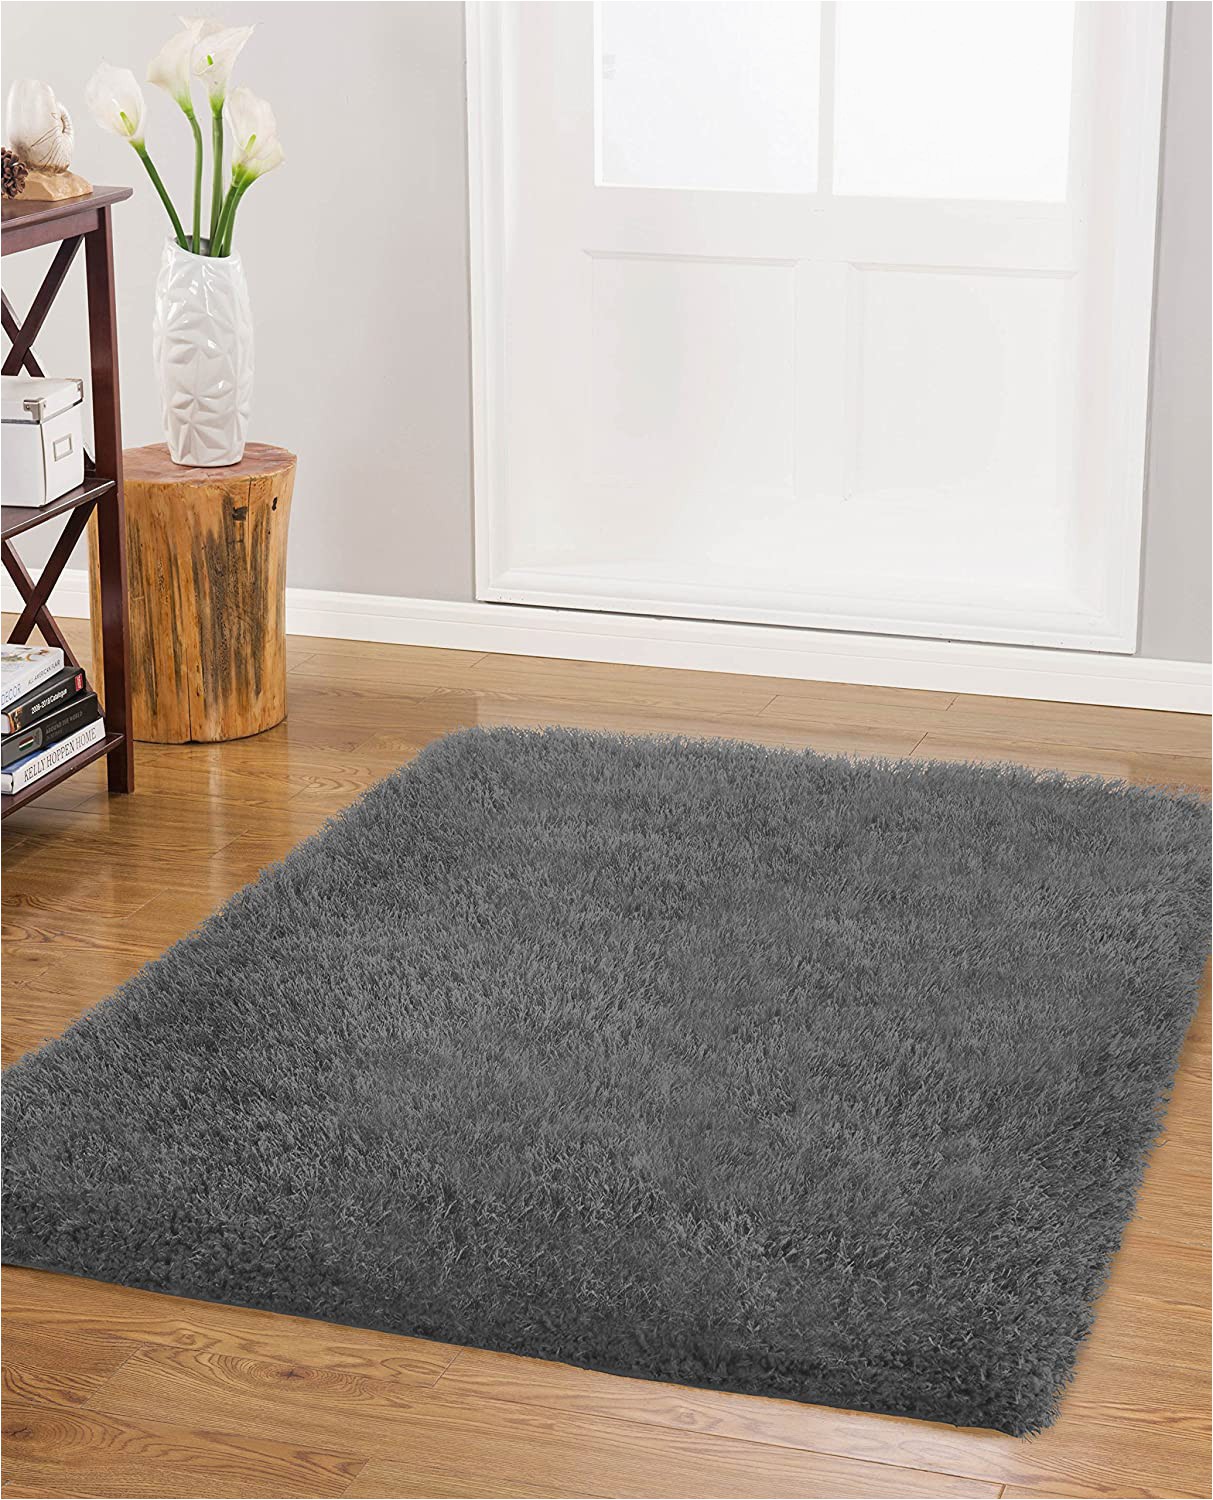 30 X 60 area Rugs Vista Living Claudia Shag area Rug 21 In X 57 In Charcoal